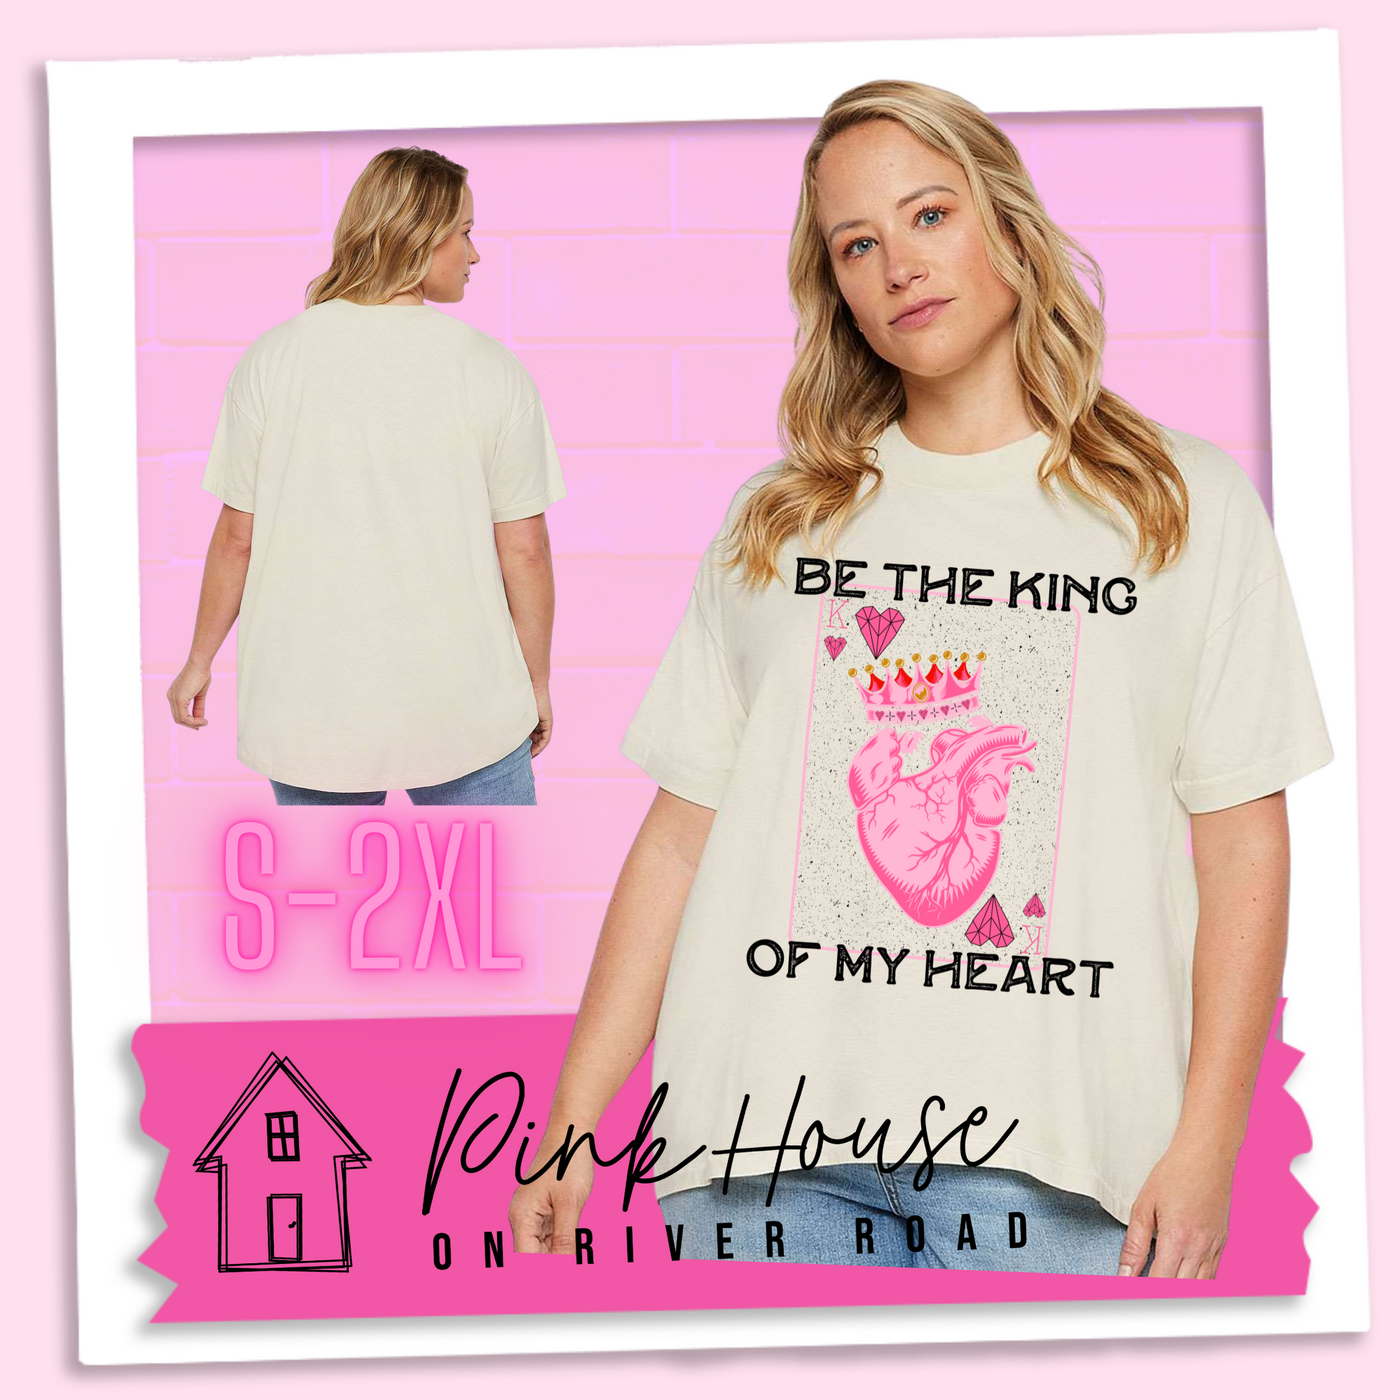 Blonde woman in a Cream Oversized HiLo Tee. Graphic says "Be The King Of My Heart" in Black writing with a vintage effect. There is a King PLaying card with a speckled background, geometric hearts in the corners with the K and a realistic heart with a crown on it in the middle of the playing card.  